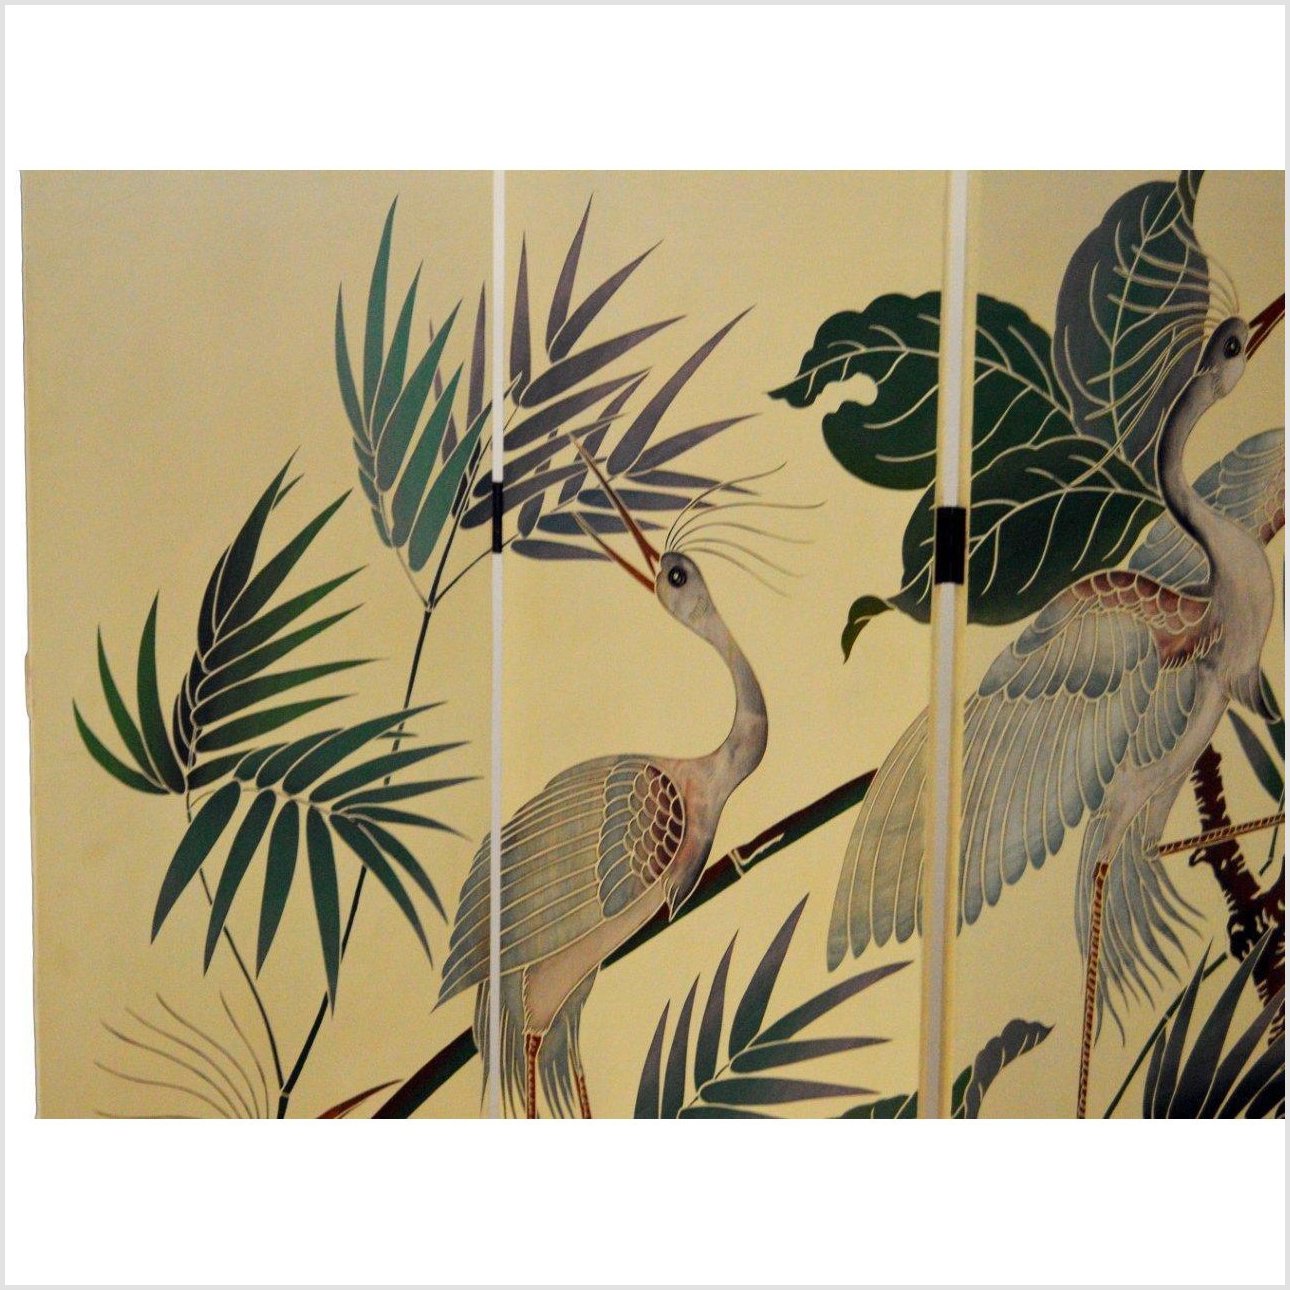 4-Panel Screen Designed with Cranes and Tropical Plants-YN2850-10. Asian & Chinese Furniture, Art, Antiques, Vintage Home Décor for sale at FEA Home